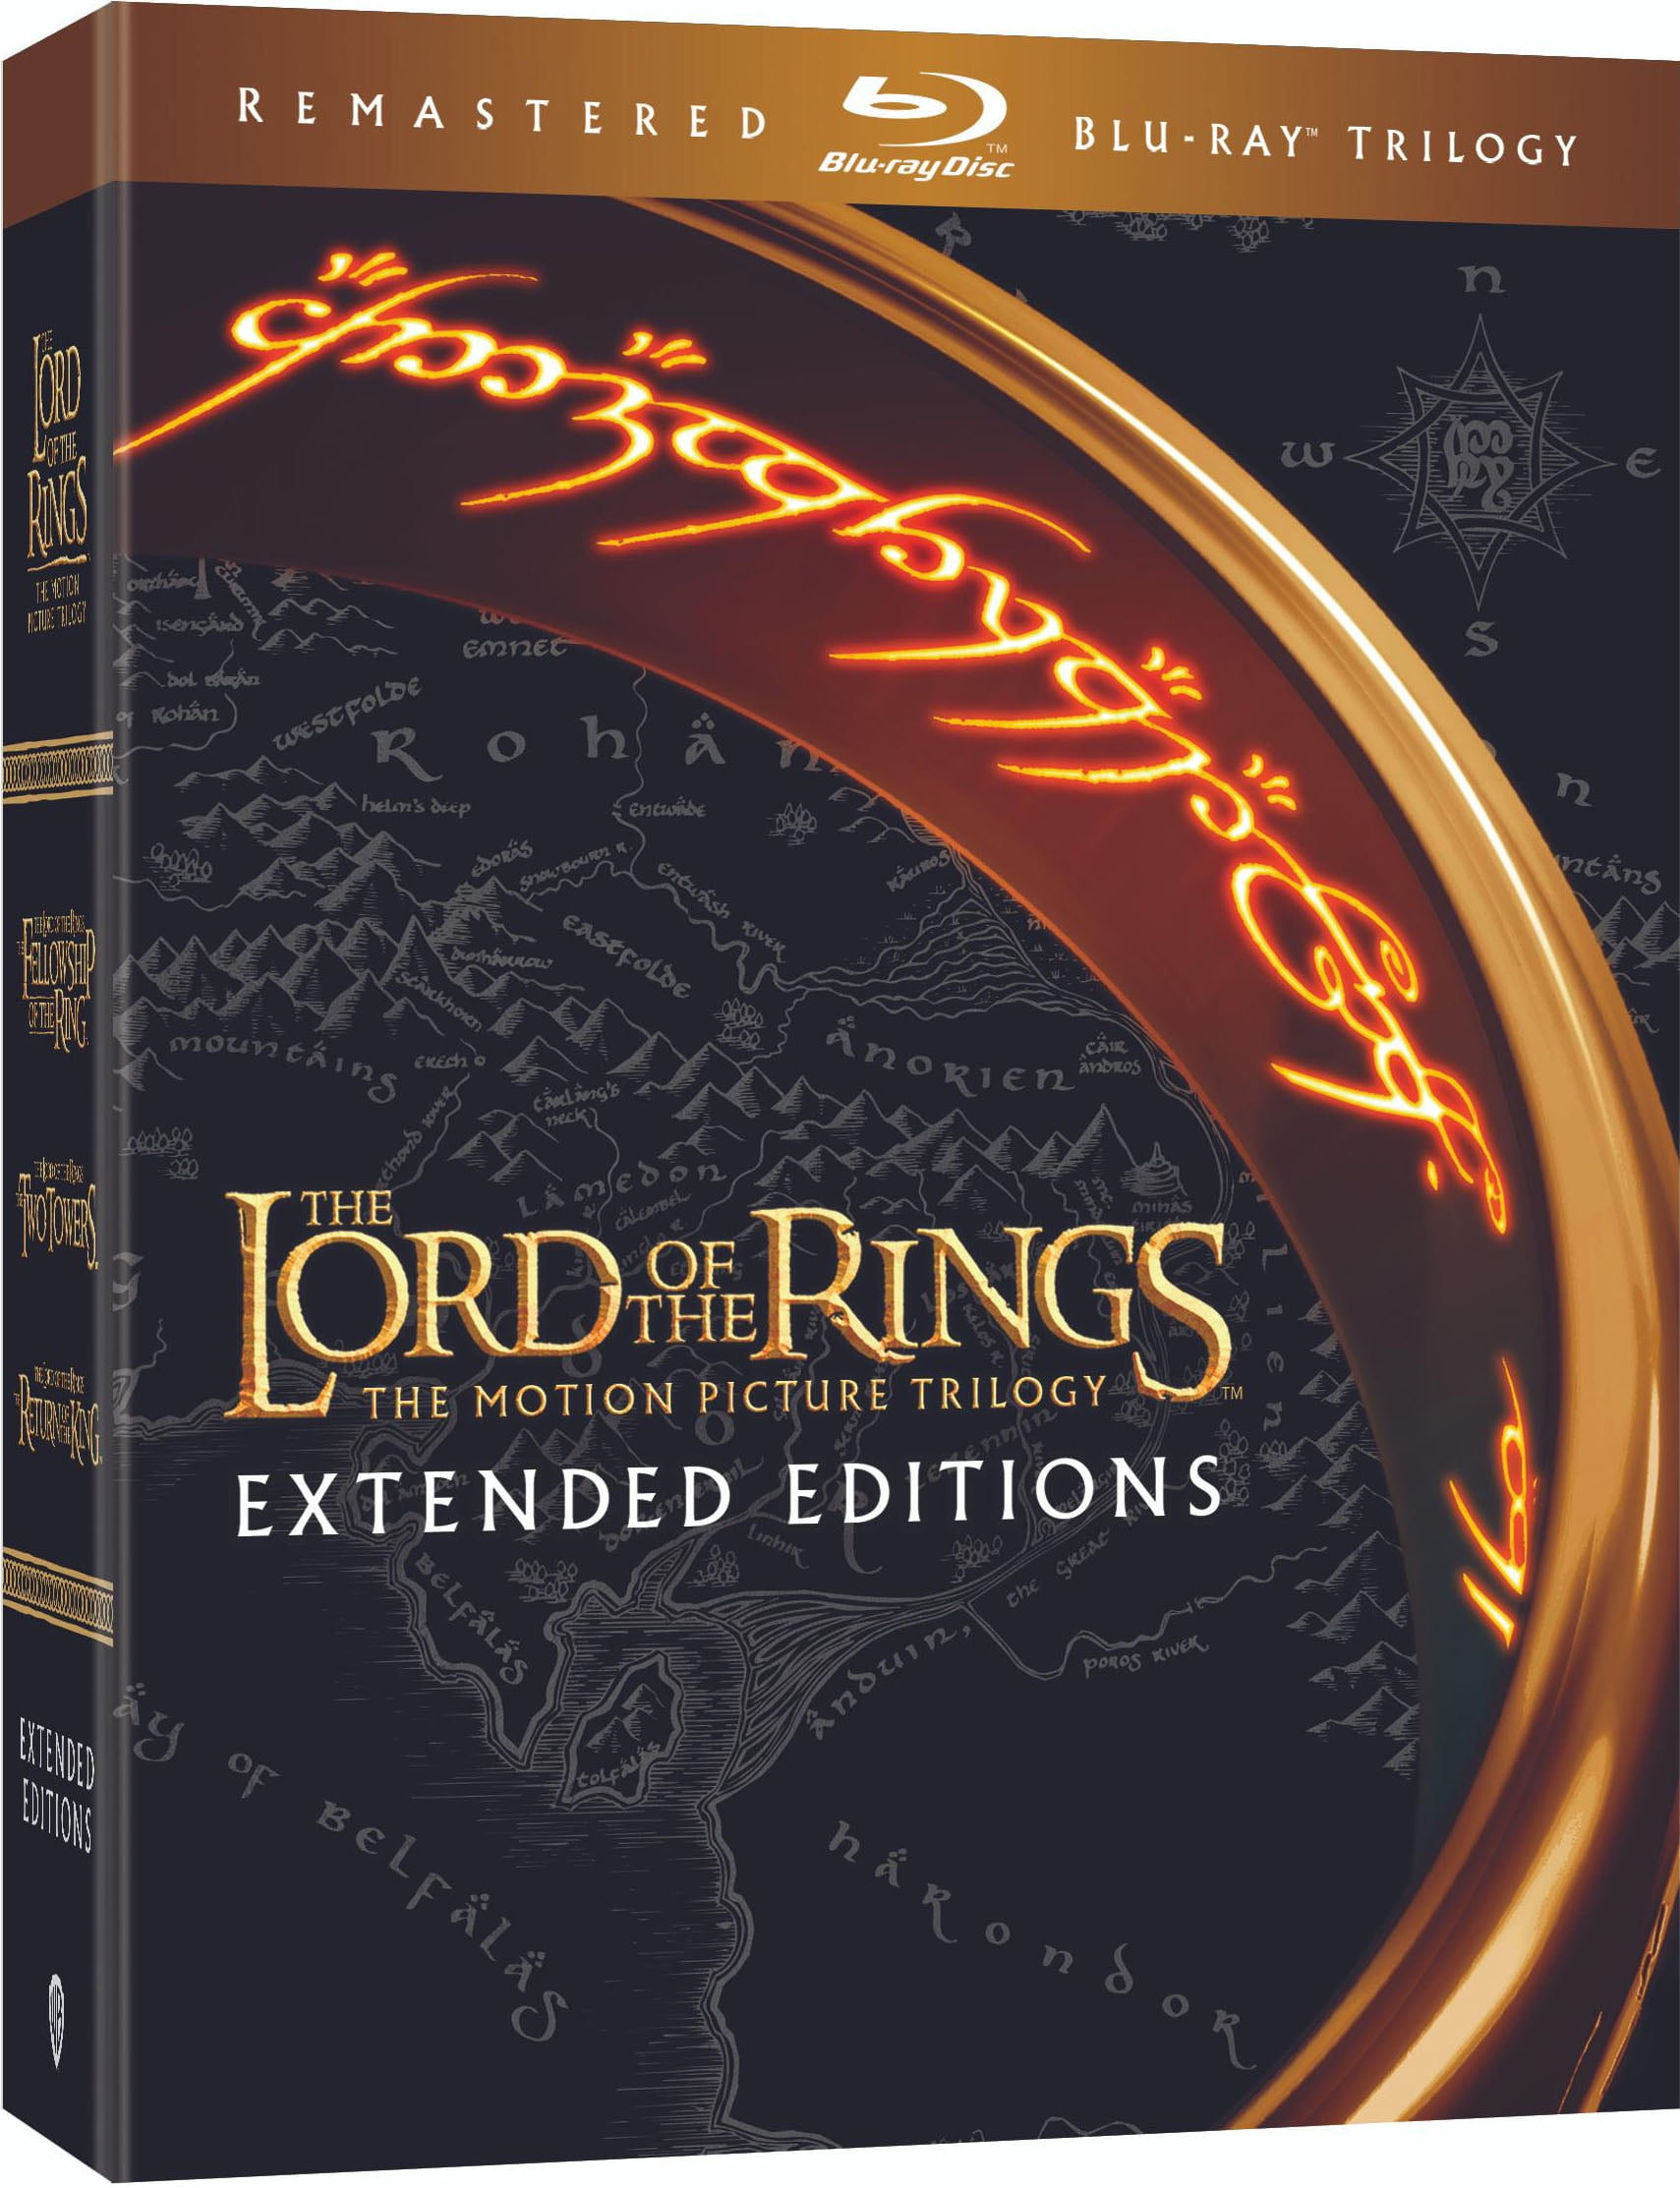 Beven het ergste Excentriek The Lord of the Rings The Motion Picture Trilogy (Extended Editions)  (Remastered Blu-ray) - Walmart.com